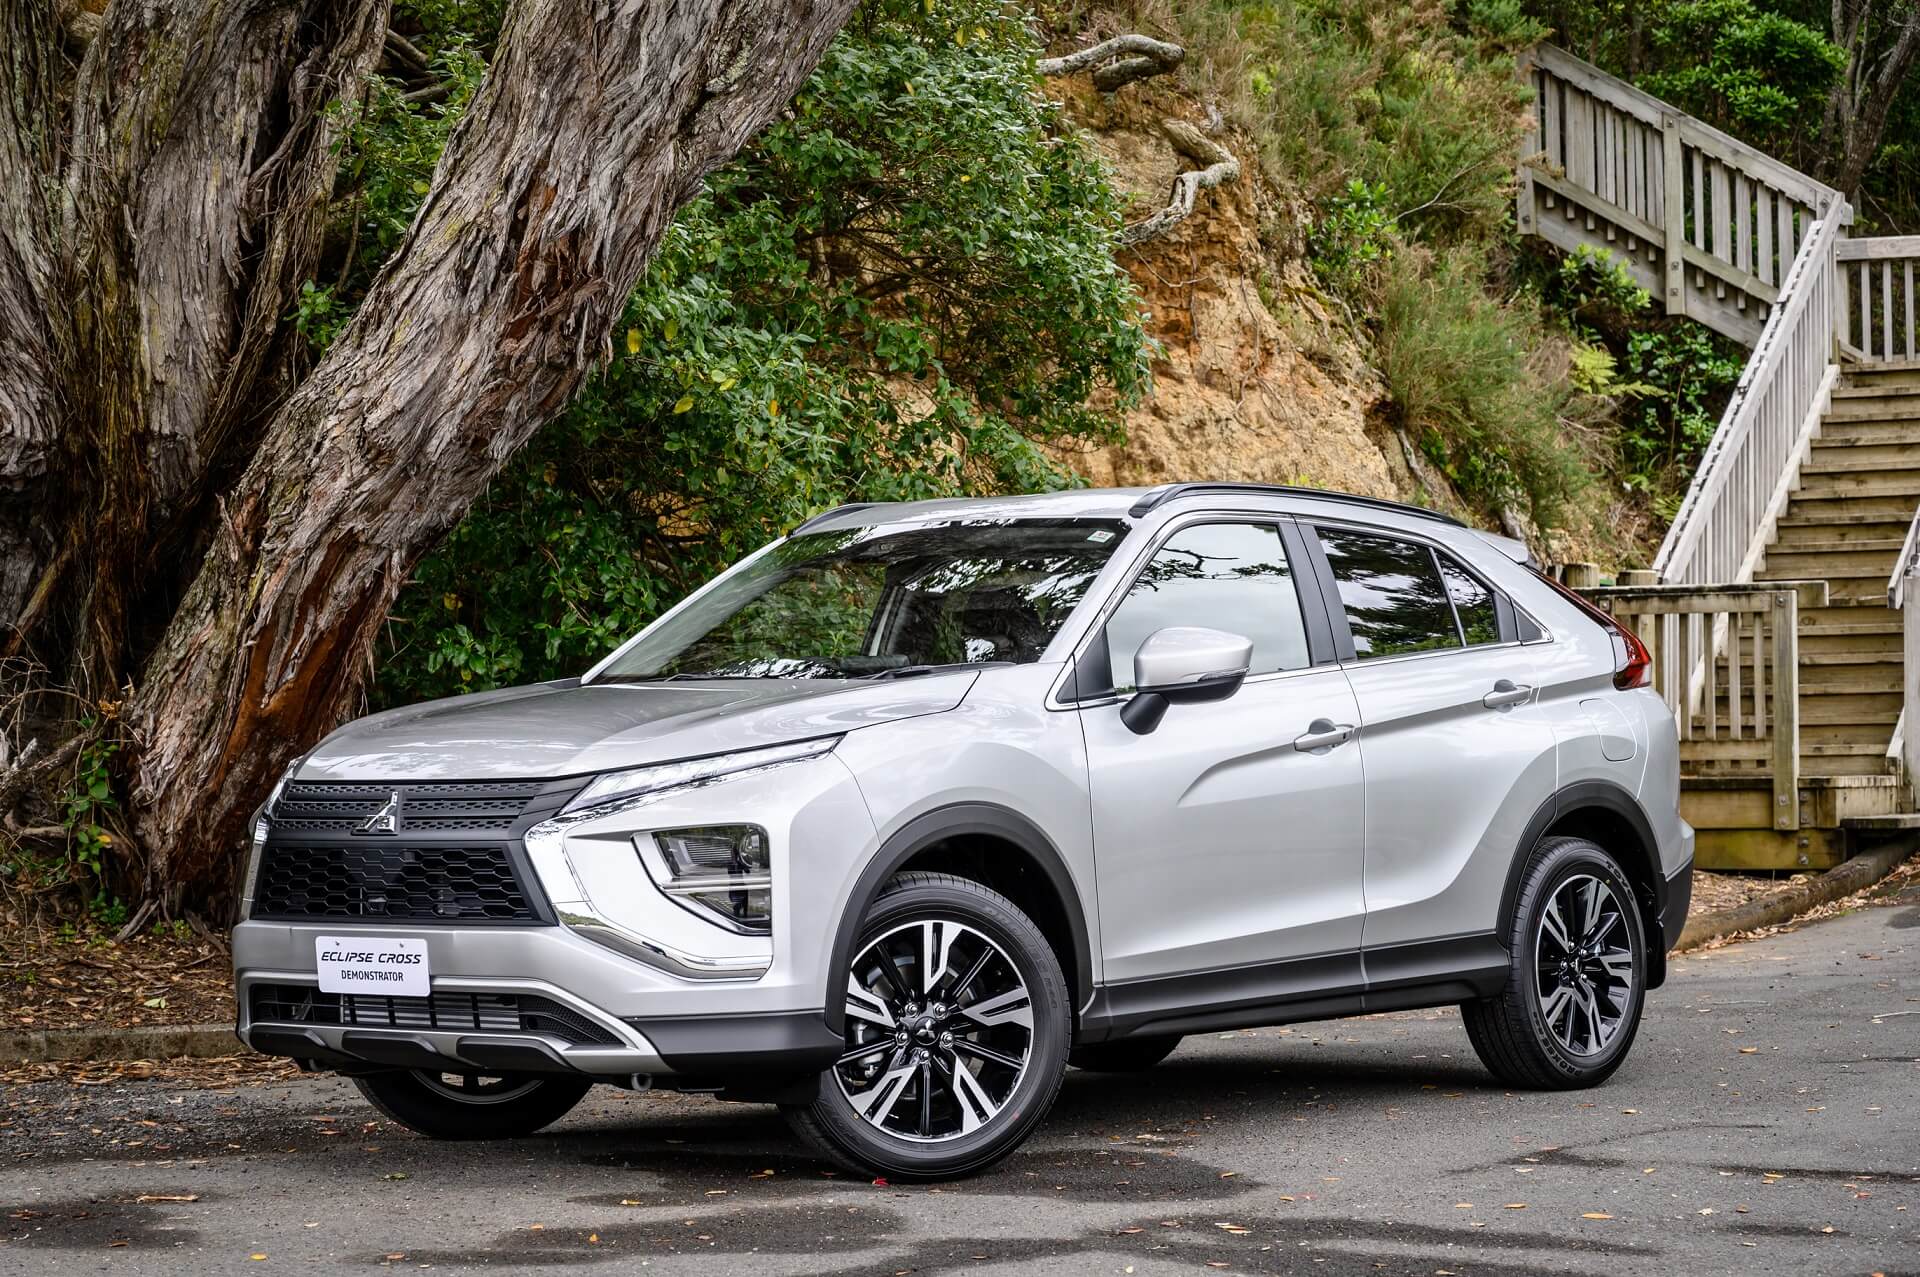 An image of a silver Mitsubishi Eclipse Cross SUV parked near a tree and some wooden stairs. 